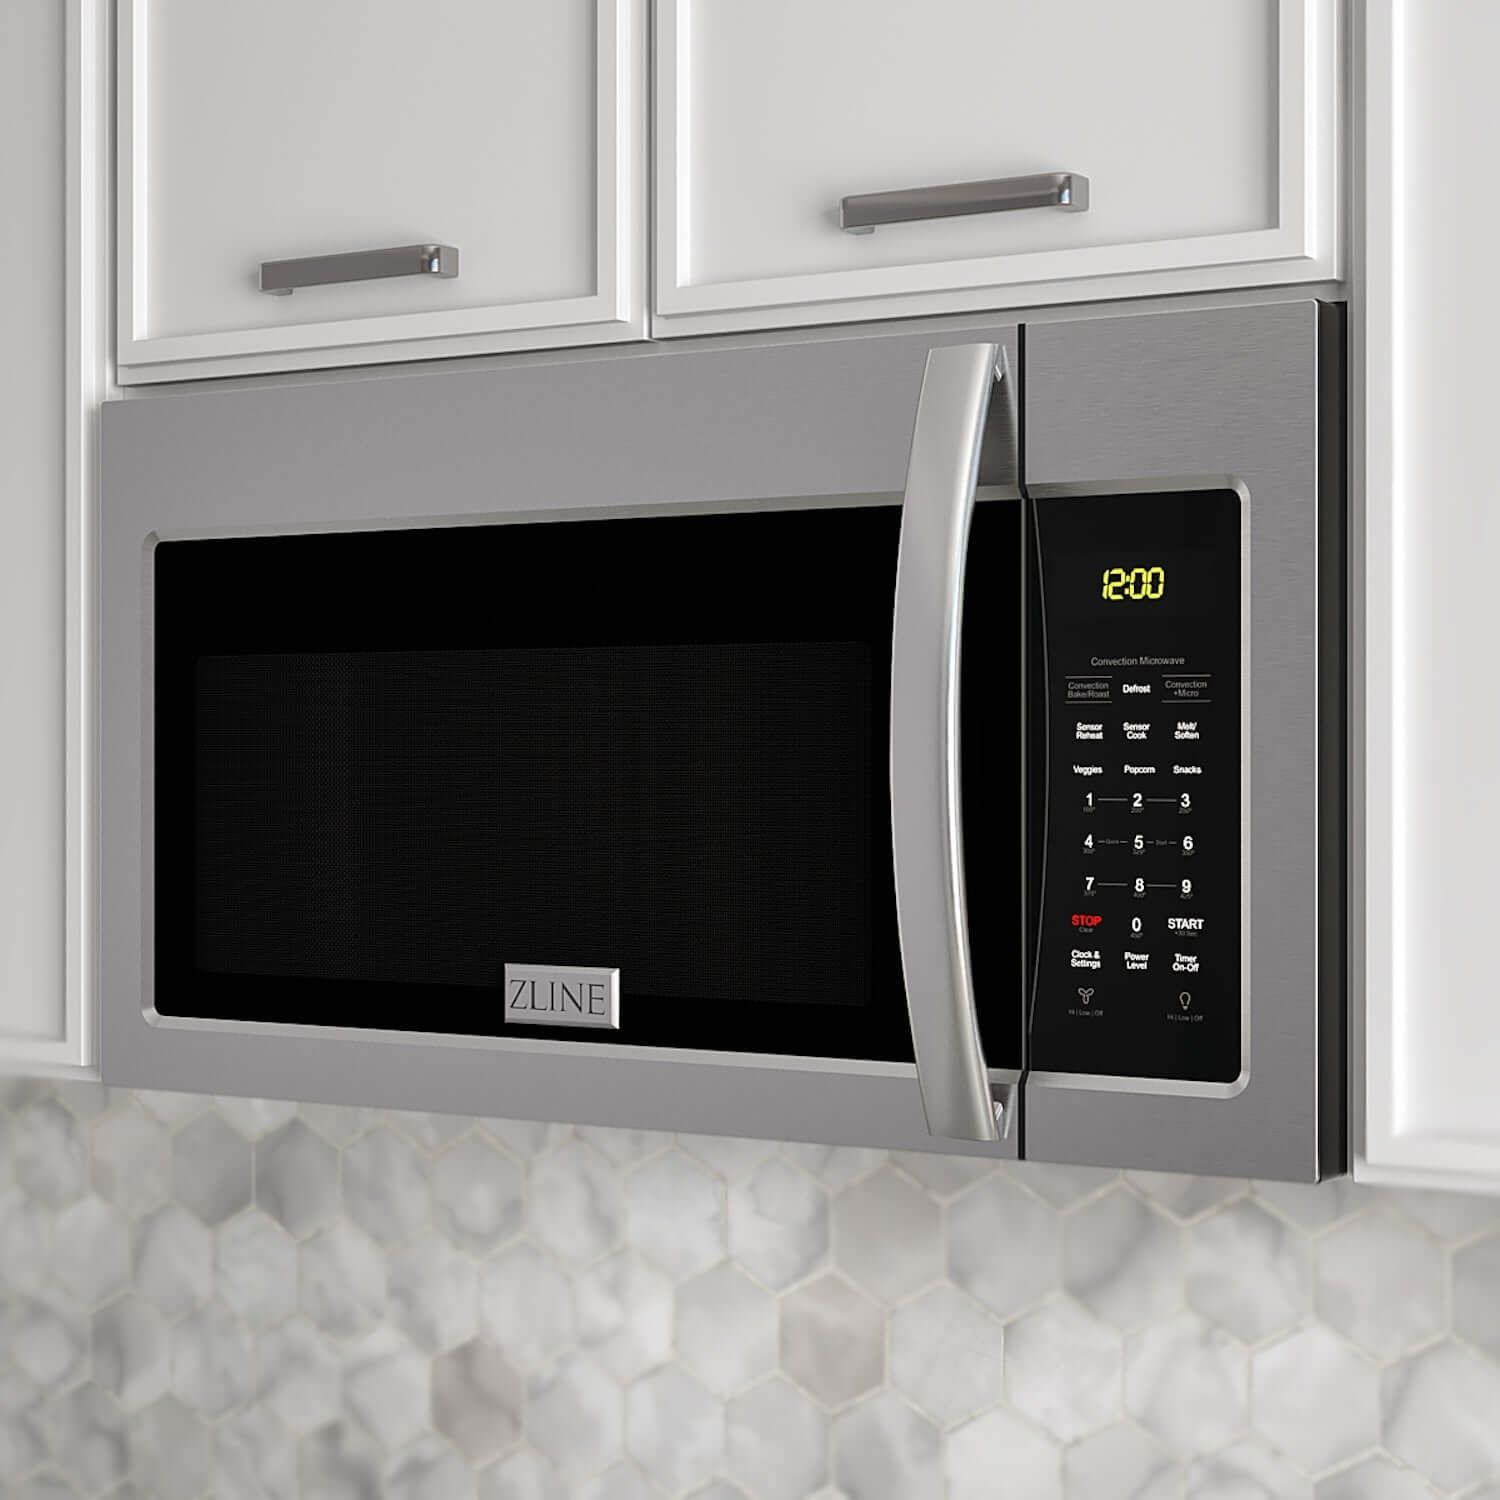 ZLINE over-the-range-microwave built-in to white cabinets